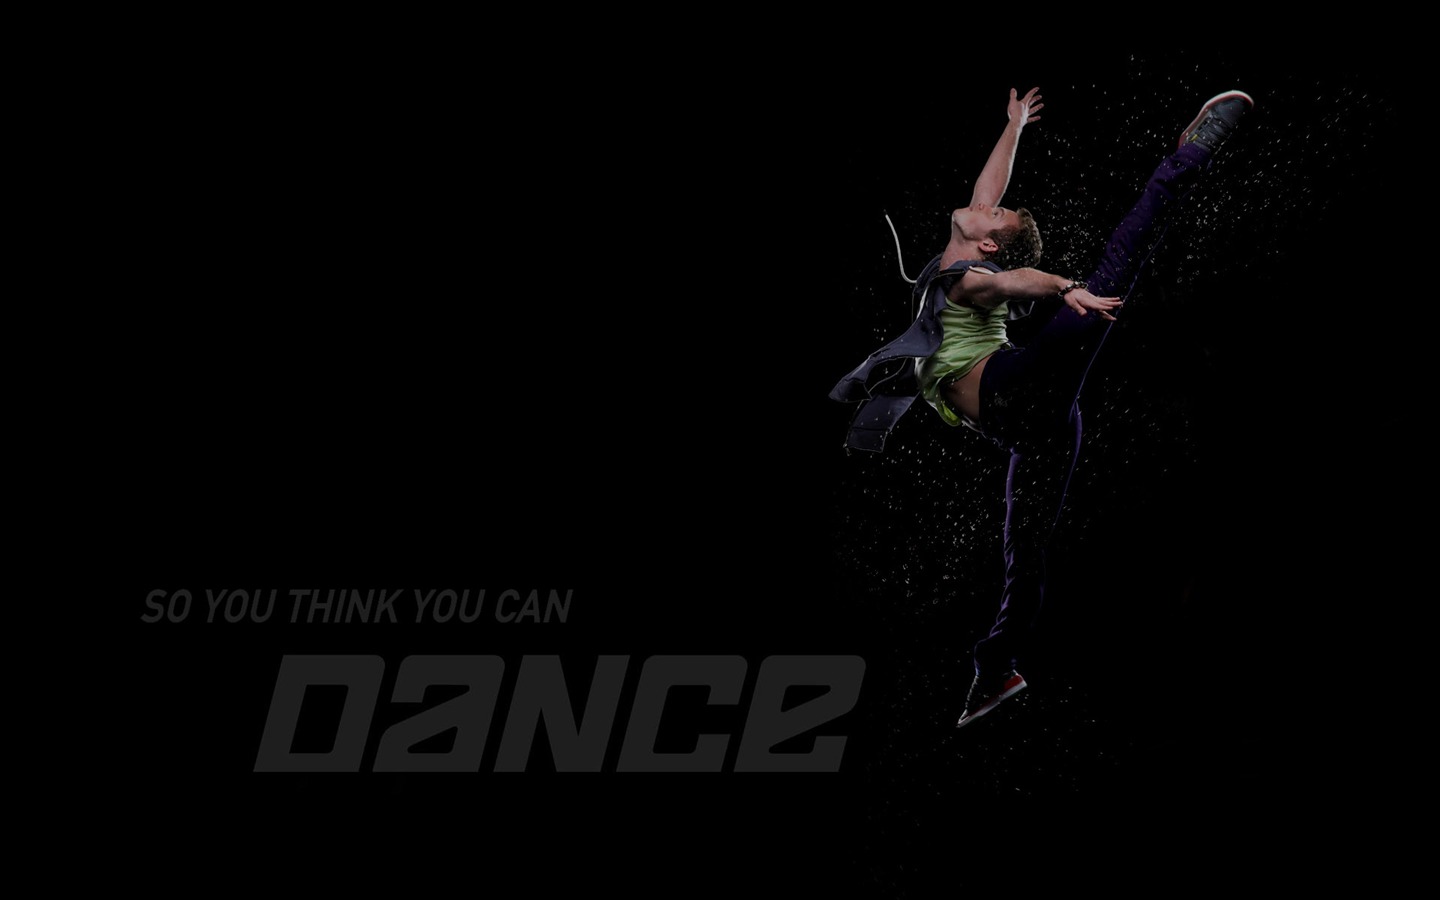 So You Think You Can Dance 舞林争霸 壁纸(二)8 - 1440x900